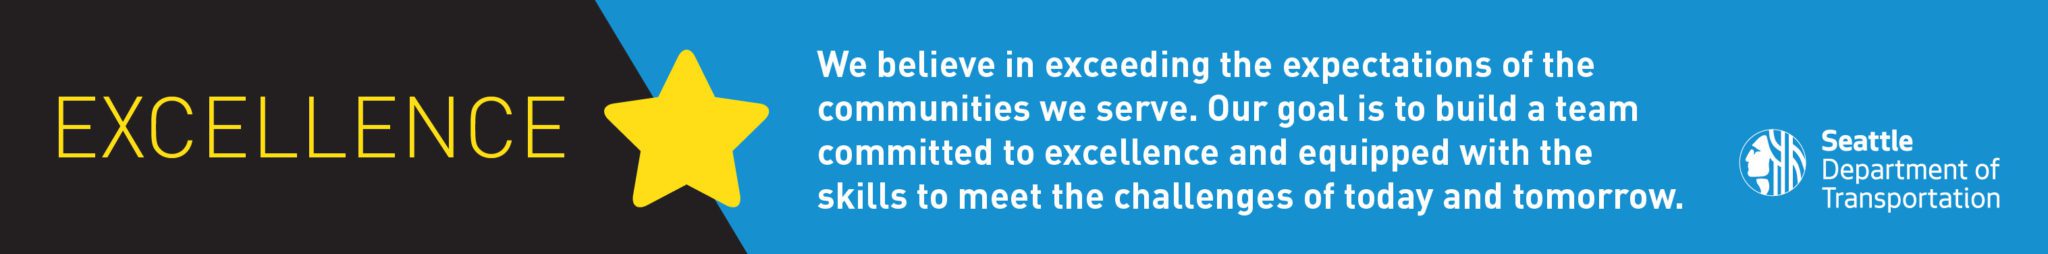 Excellence: We believe in exceeding the expectations of the communities we serve. Our goal is to build a team committed to excellence and equipped with the skills to meet the challenges of today and tomorrow.